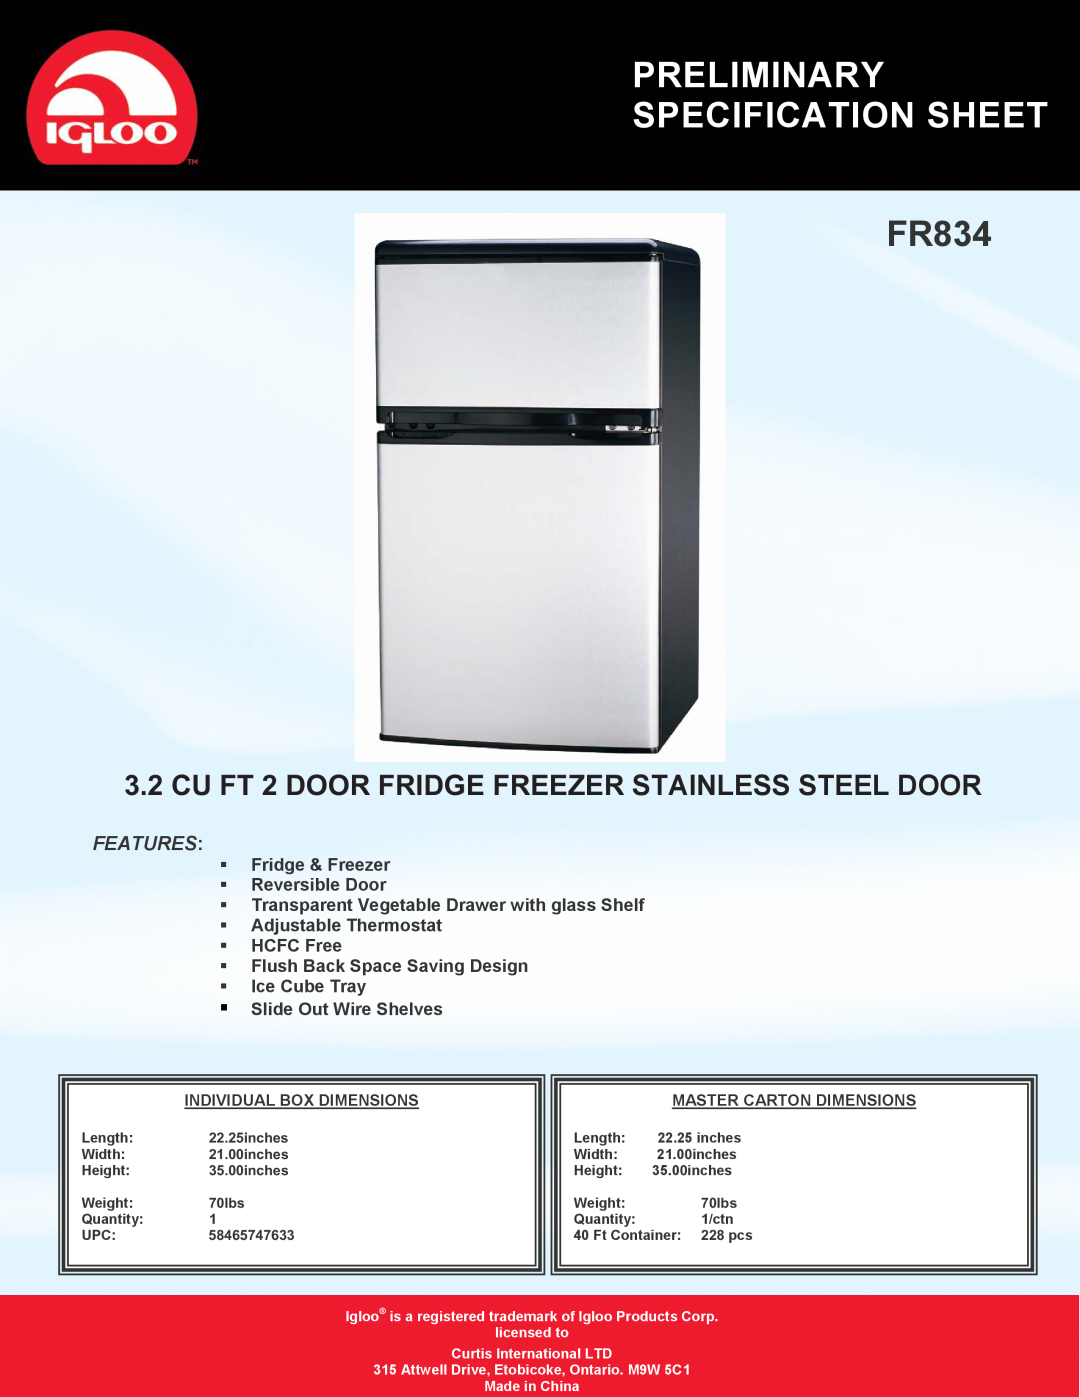 Igloo FR834 specifications Preliminary Specification Sheet, Features, ƒFridge & Freezer ƒReversible Door, Made in China 